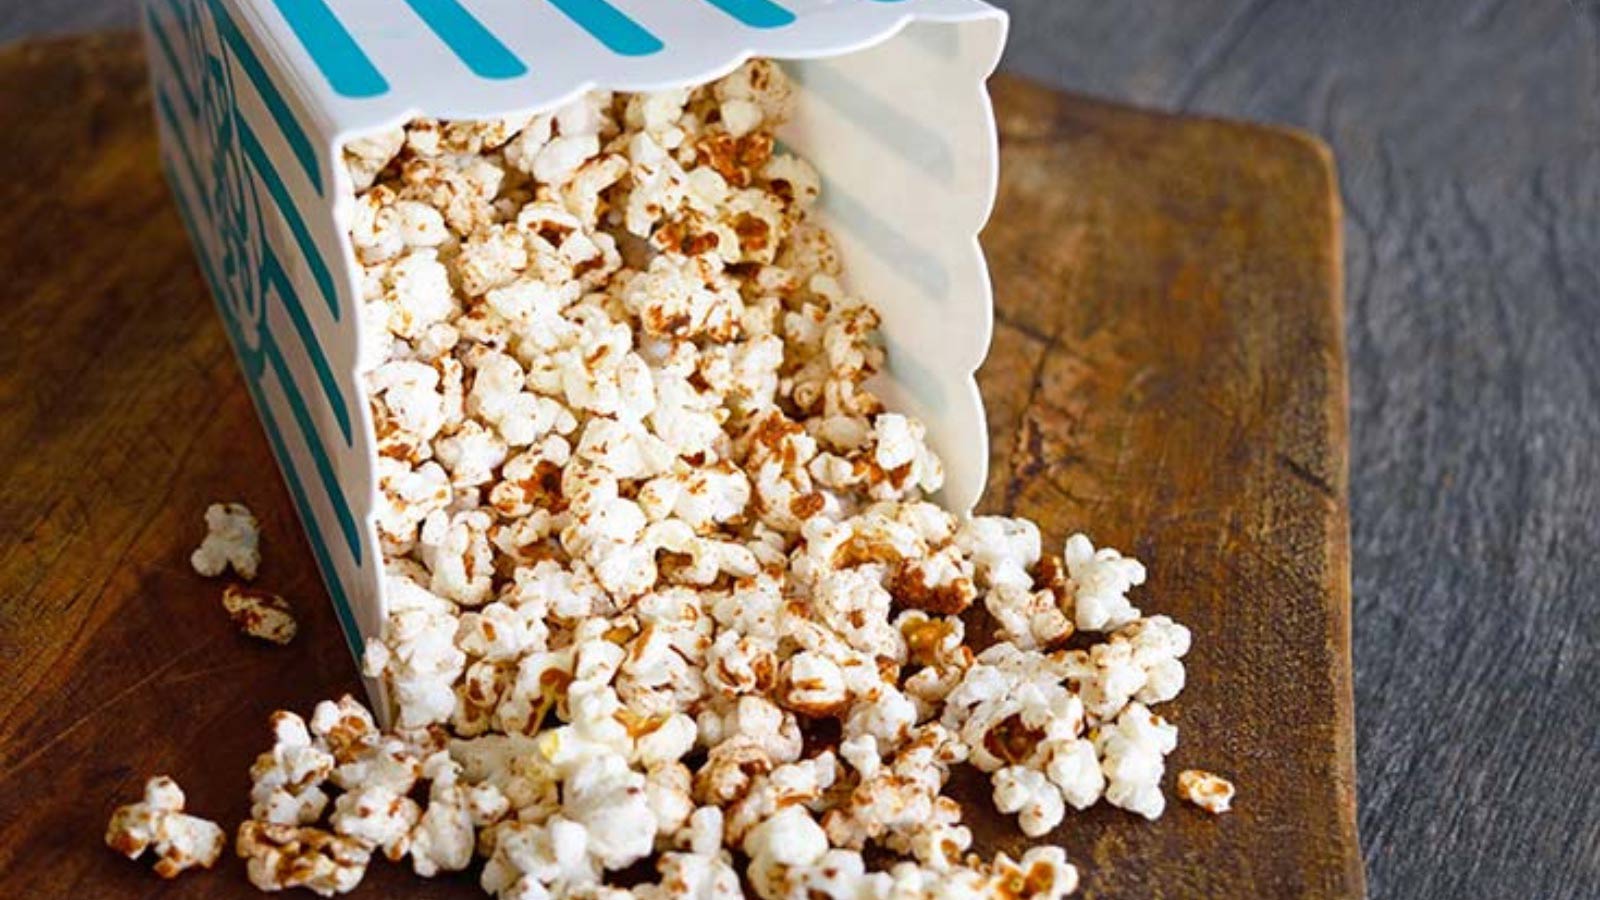 <p><a href="https://www.thegraciouspantry.com/clean-eating-kettle-corn/">Homemade kettle corn</a> is a tasty road trip snack that everyone enjoys. Kettle corn is a sweetened version of popcorn, and it tastes amazing. This recipe uses two secret ingredients to get the sweet kettle corn flavor you love but healthier.  </p>